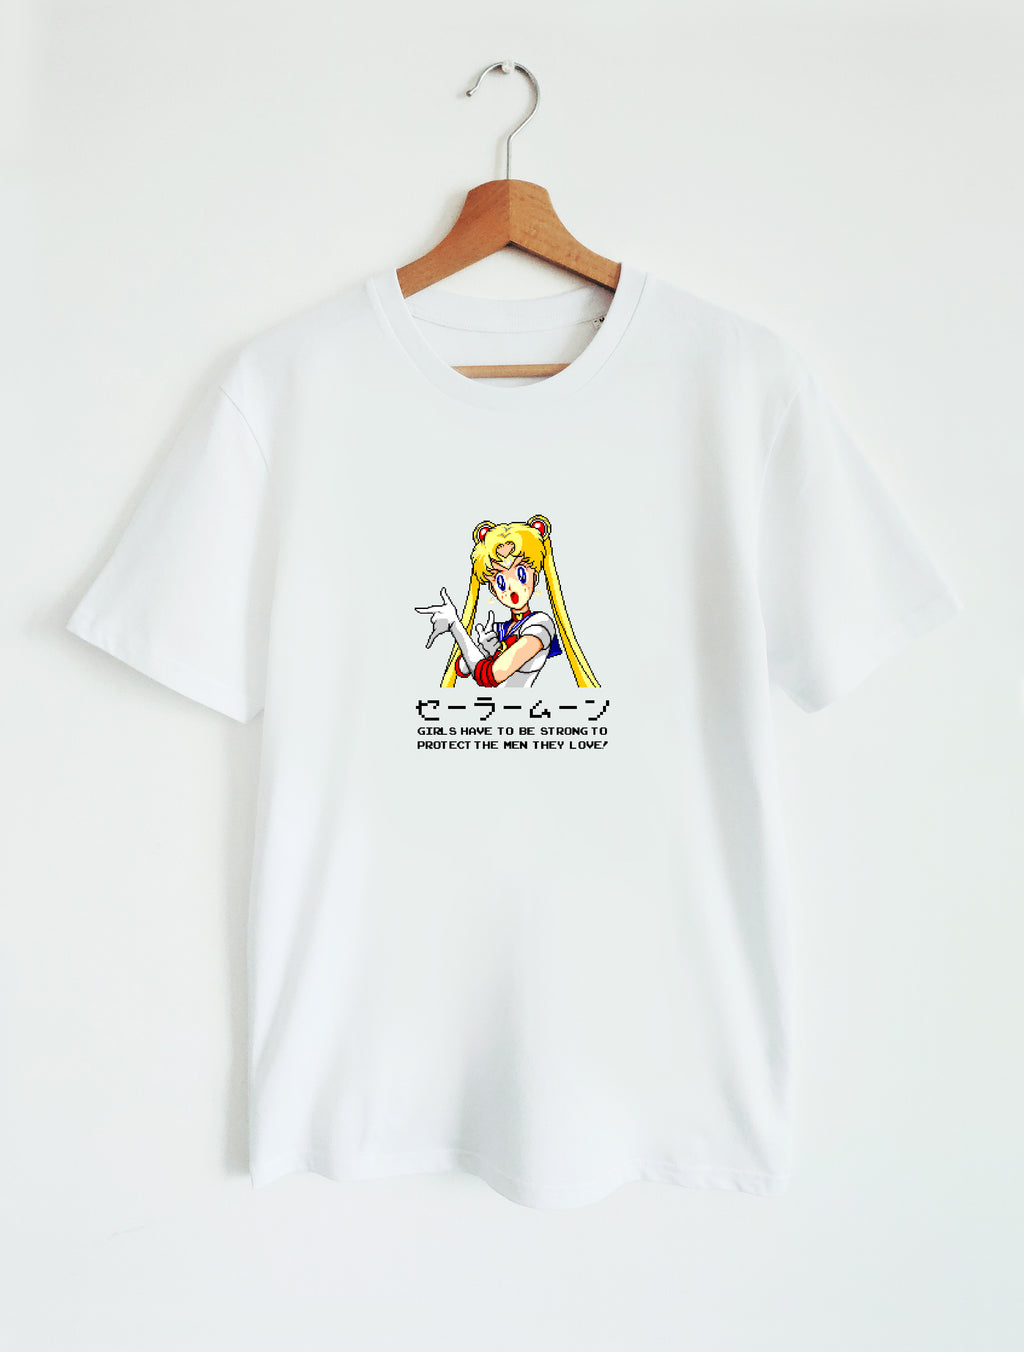 T-SHIRT UNISEX / SAILOR MOON USAGI “ GIRLS HAVE TO BE STRONG”